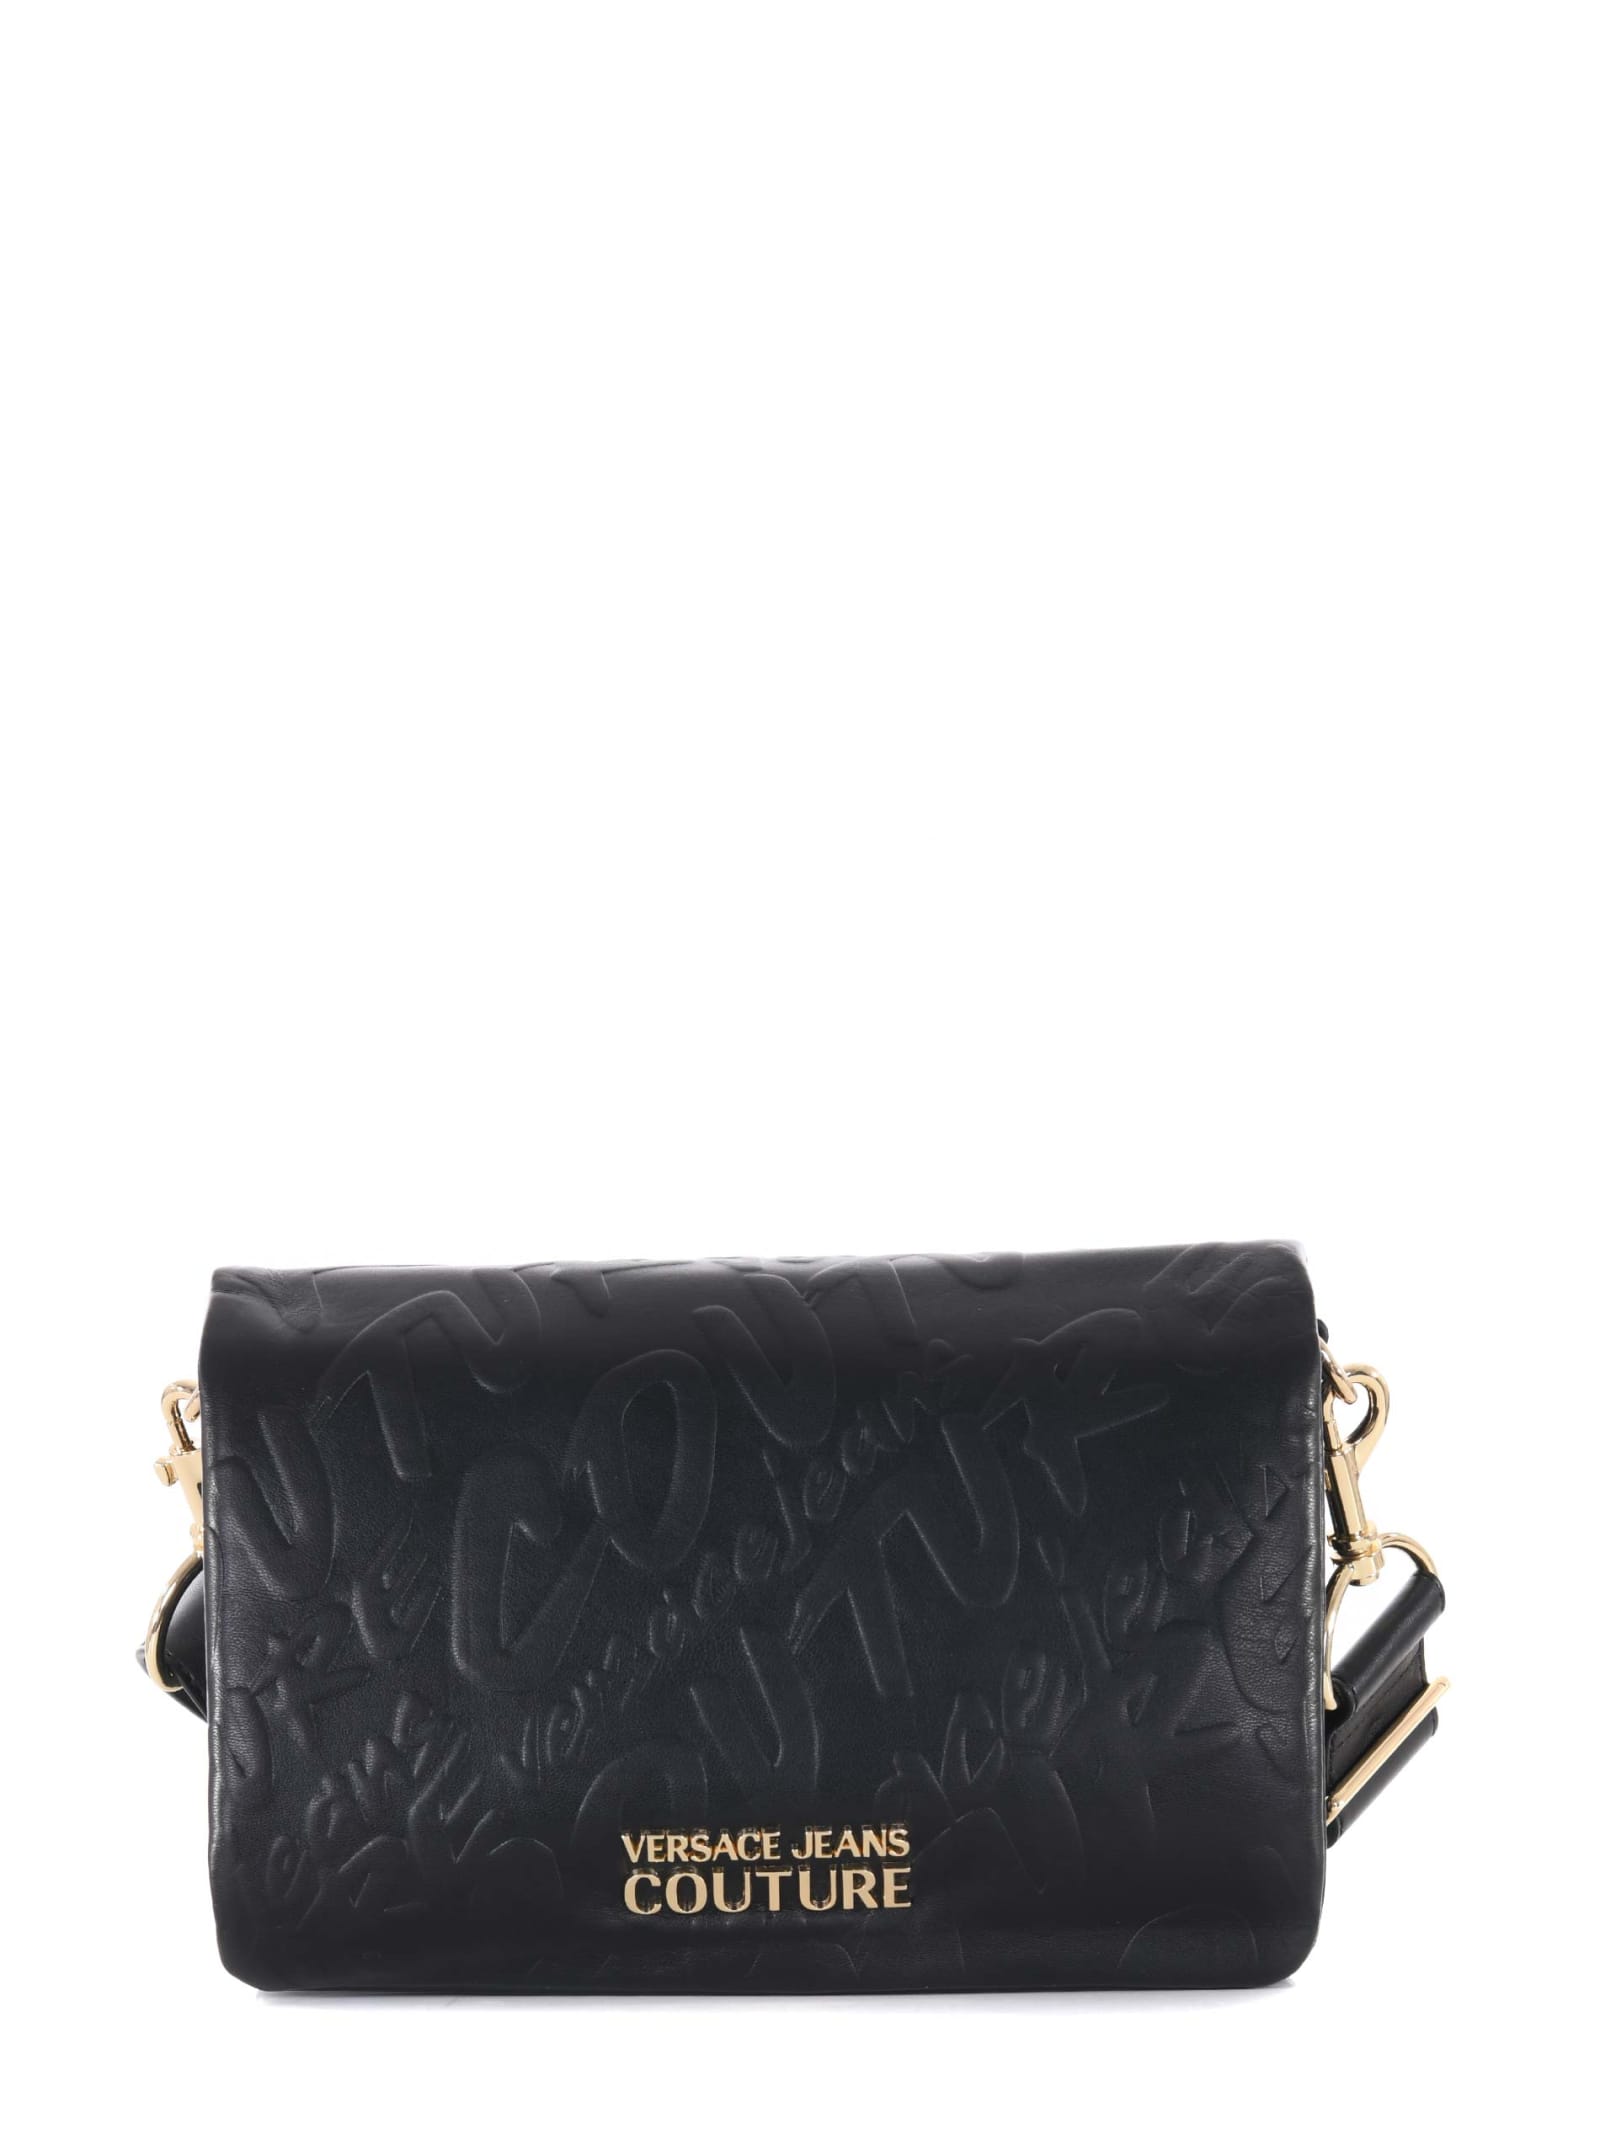 Versace Jeans Couture Eco-leather Bag